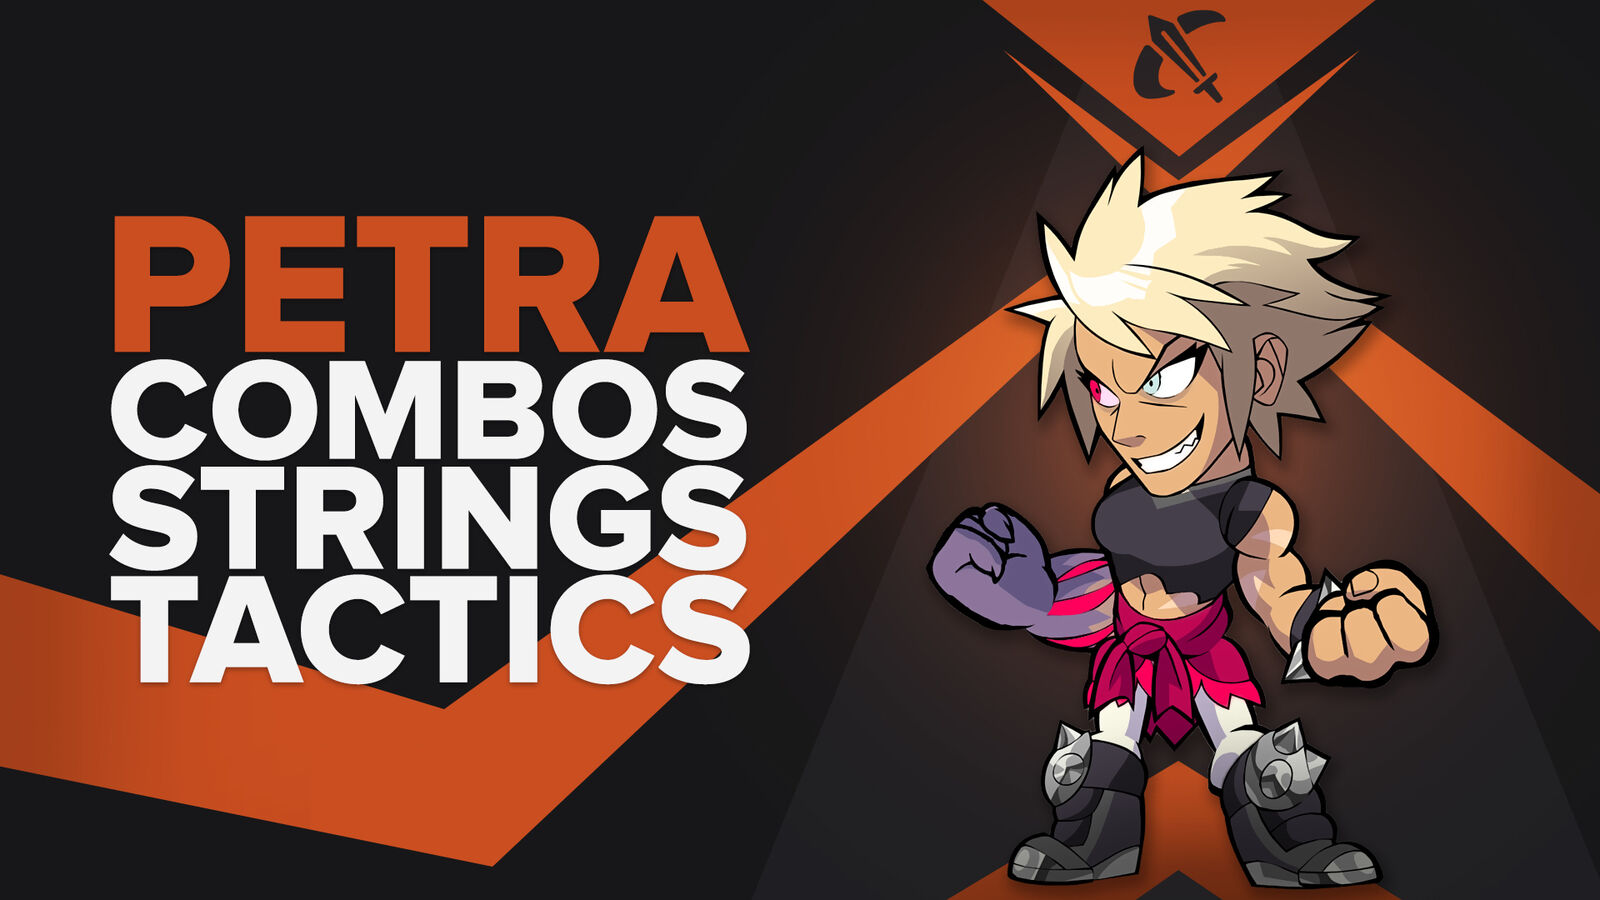 Best Petra combos, strings, and combat tactics in Brawlhalla